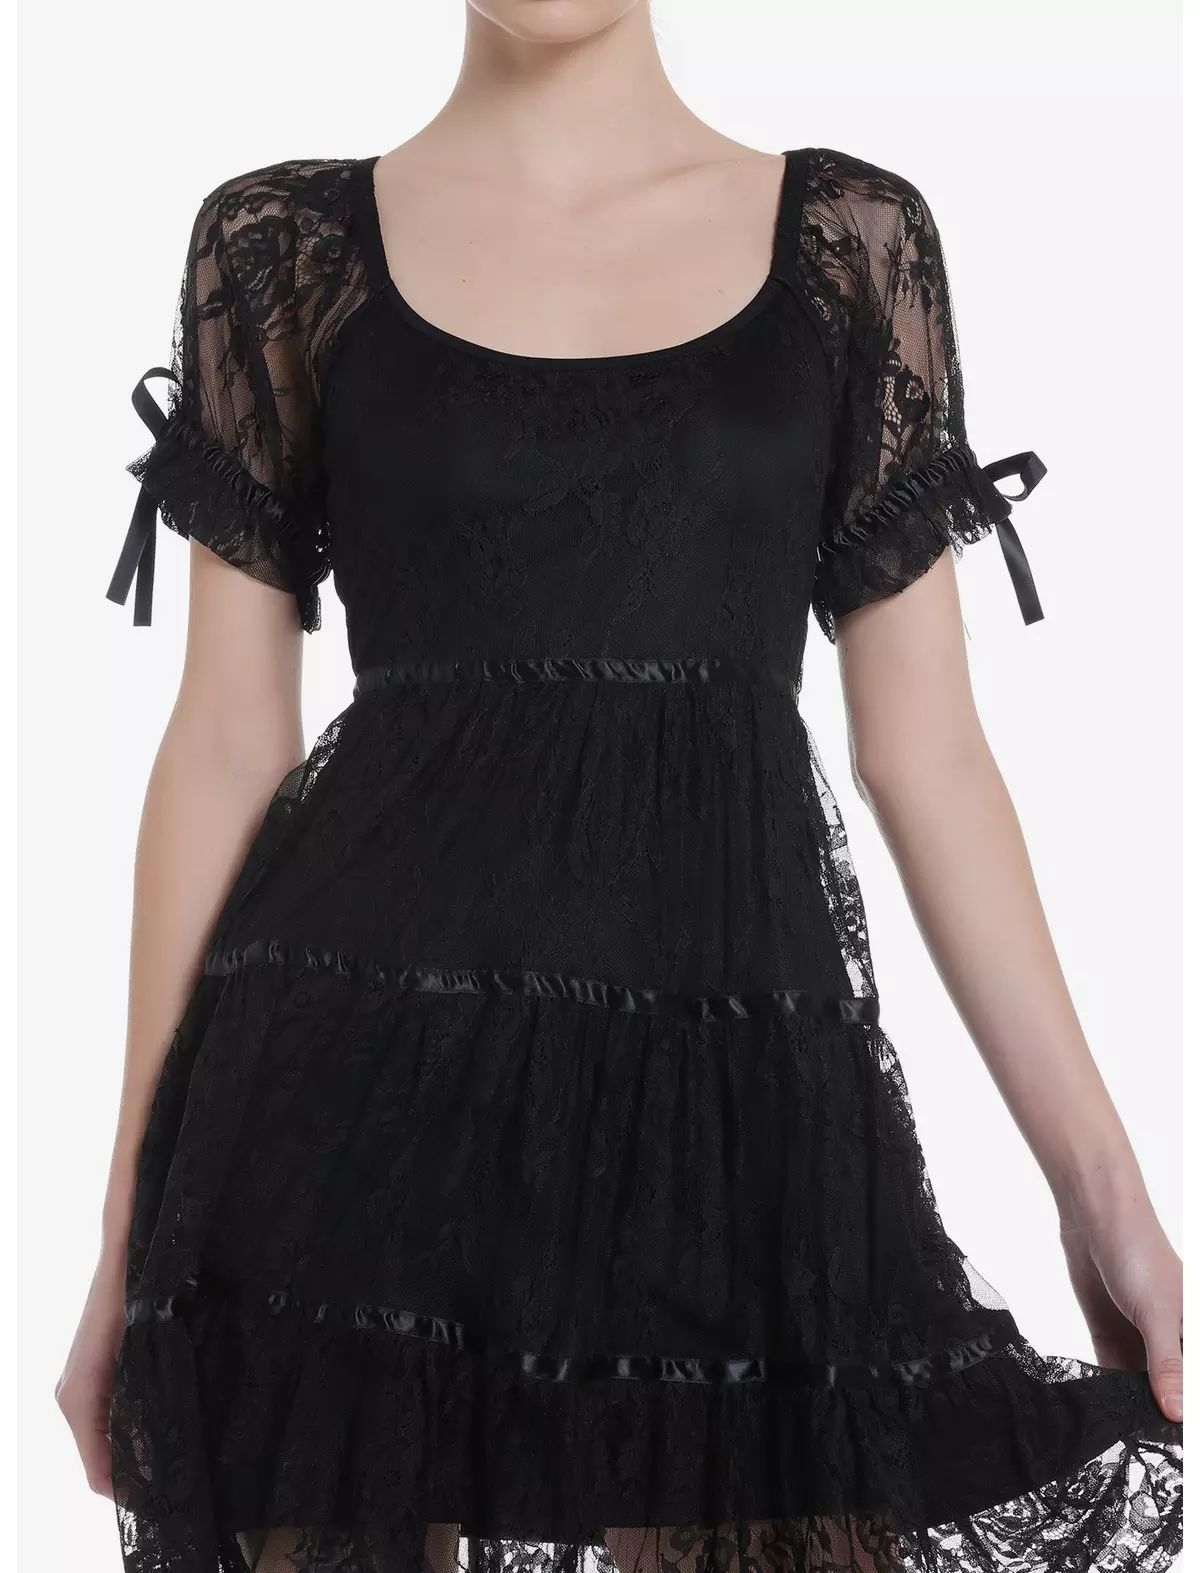 Cosmic Aura Black Lace Babydoll Tiered Dress | Hot Topic